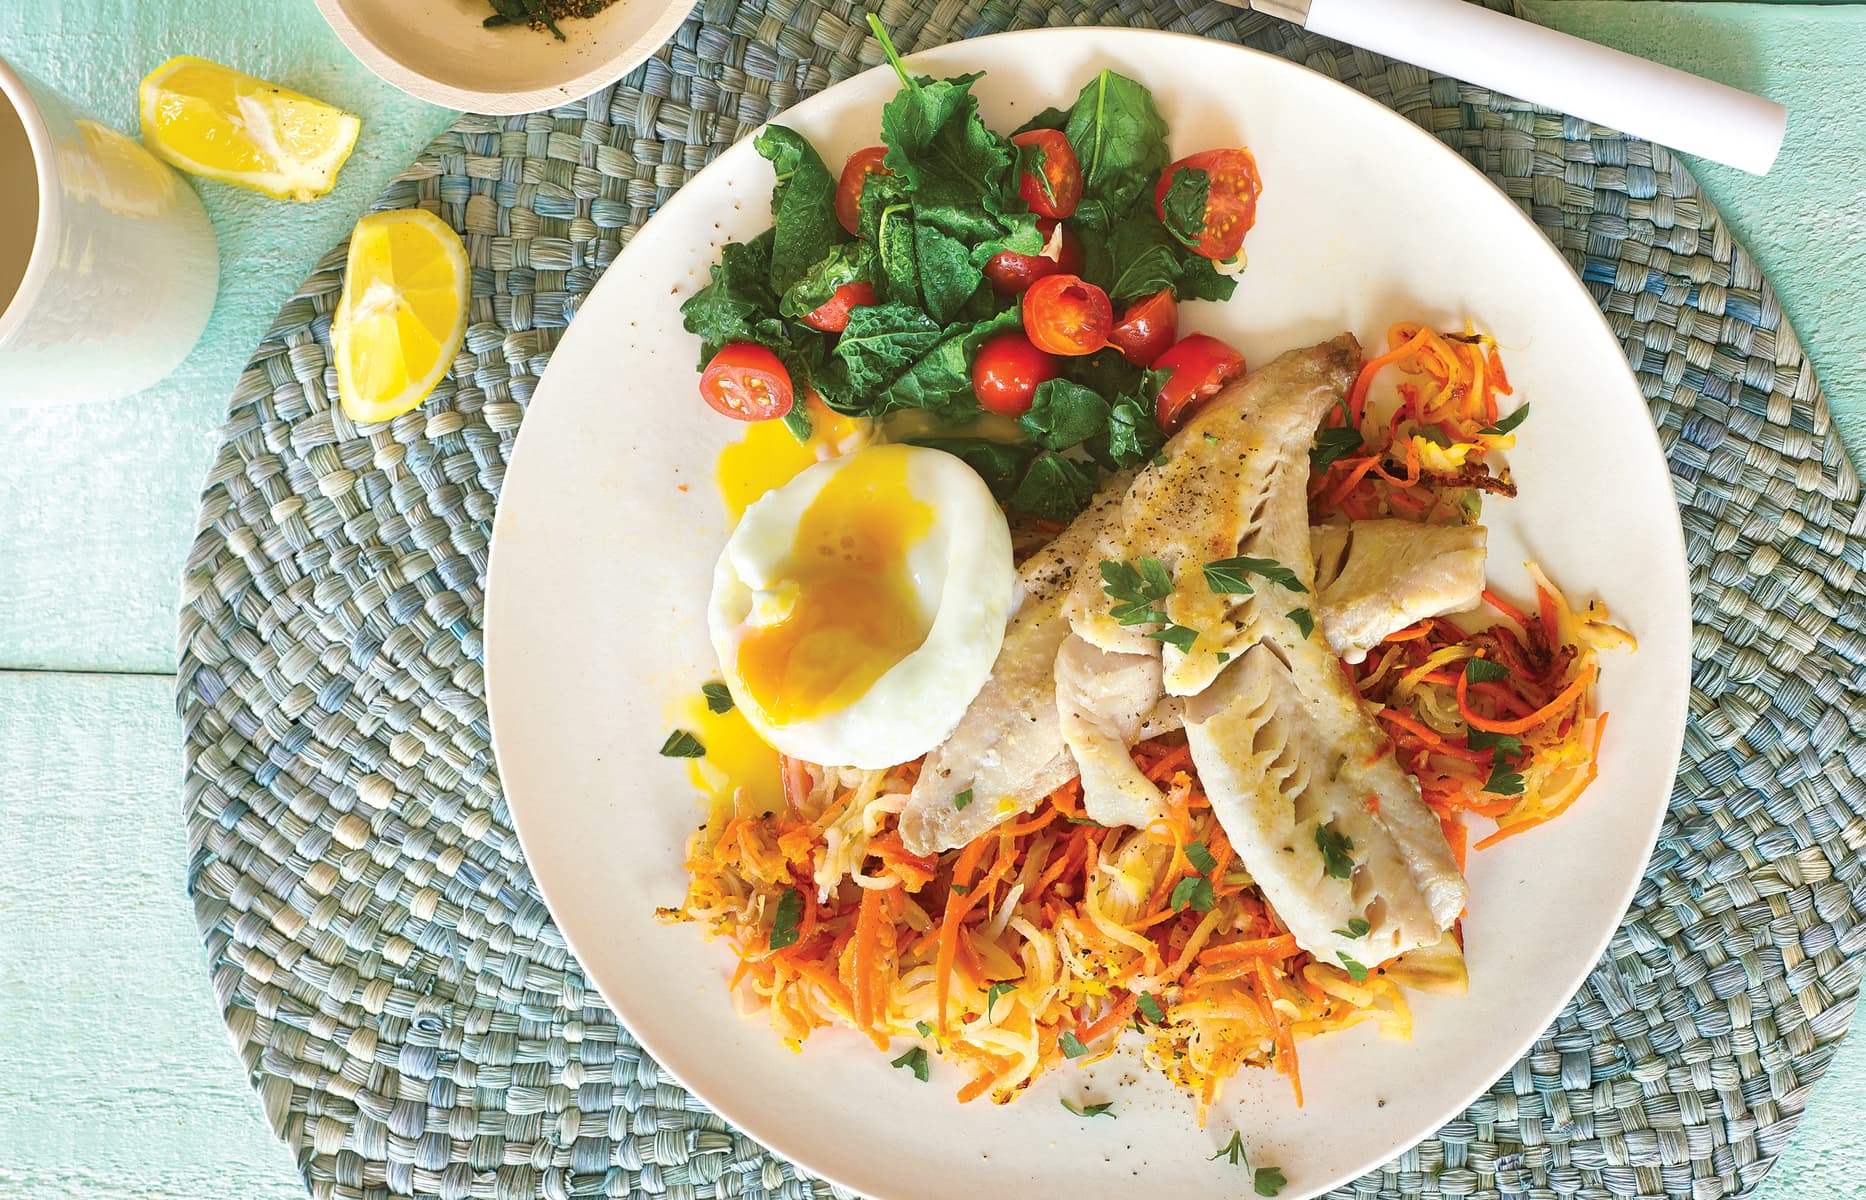 Pan-fried fish with poached egg on potato rosti - Healthy Food Guide